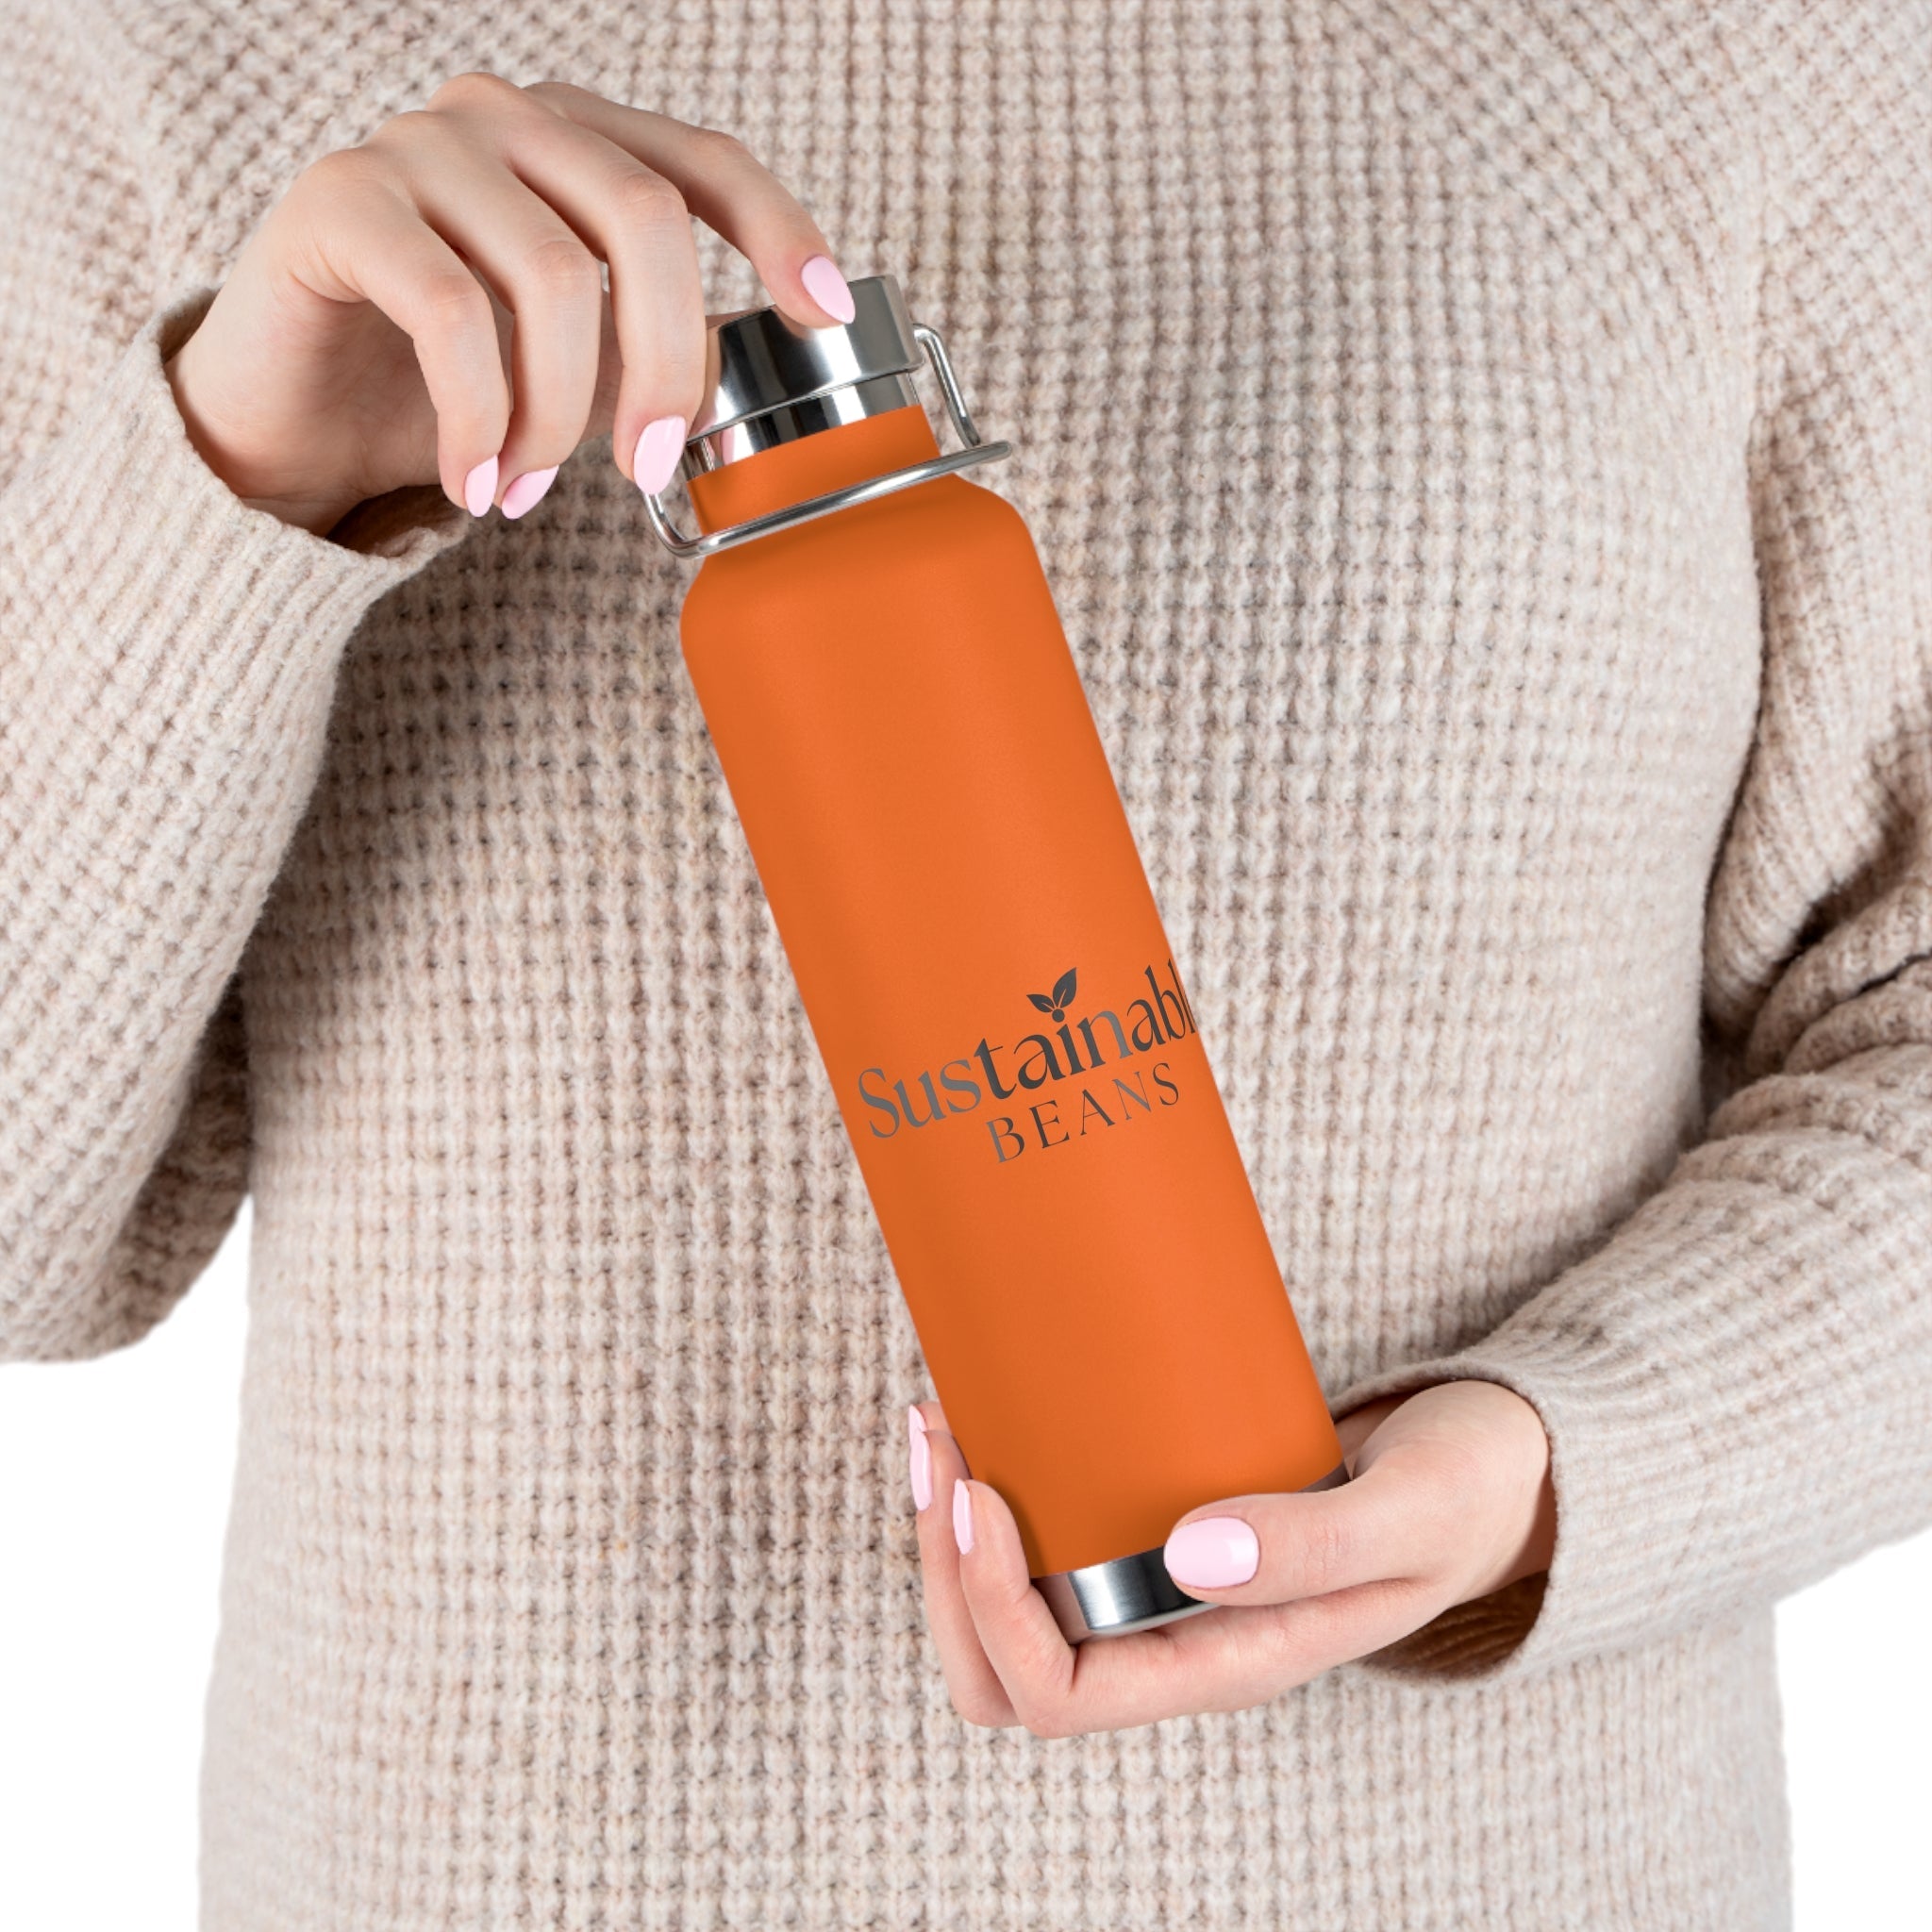 22oz Thermos: Your Beverage's Best Friend - Sustainable Beans